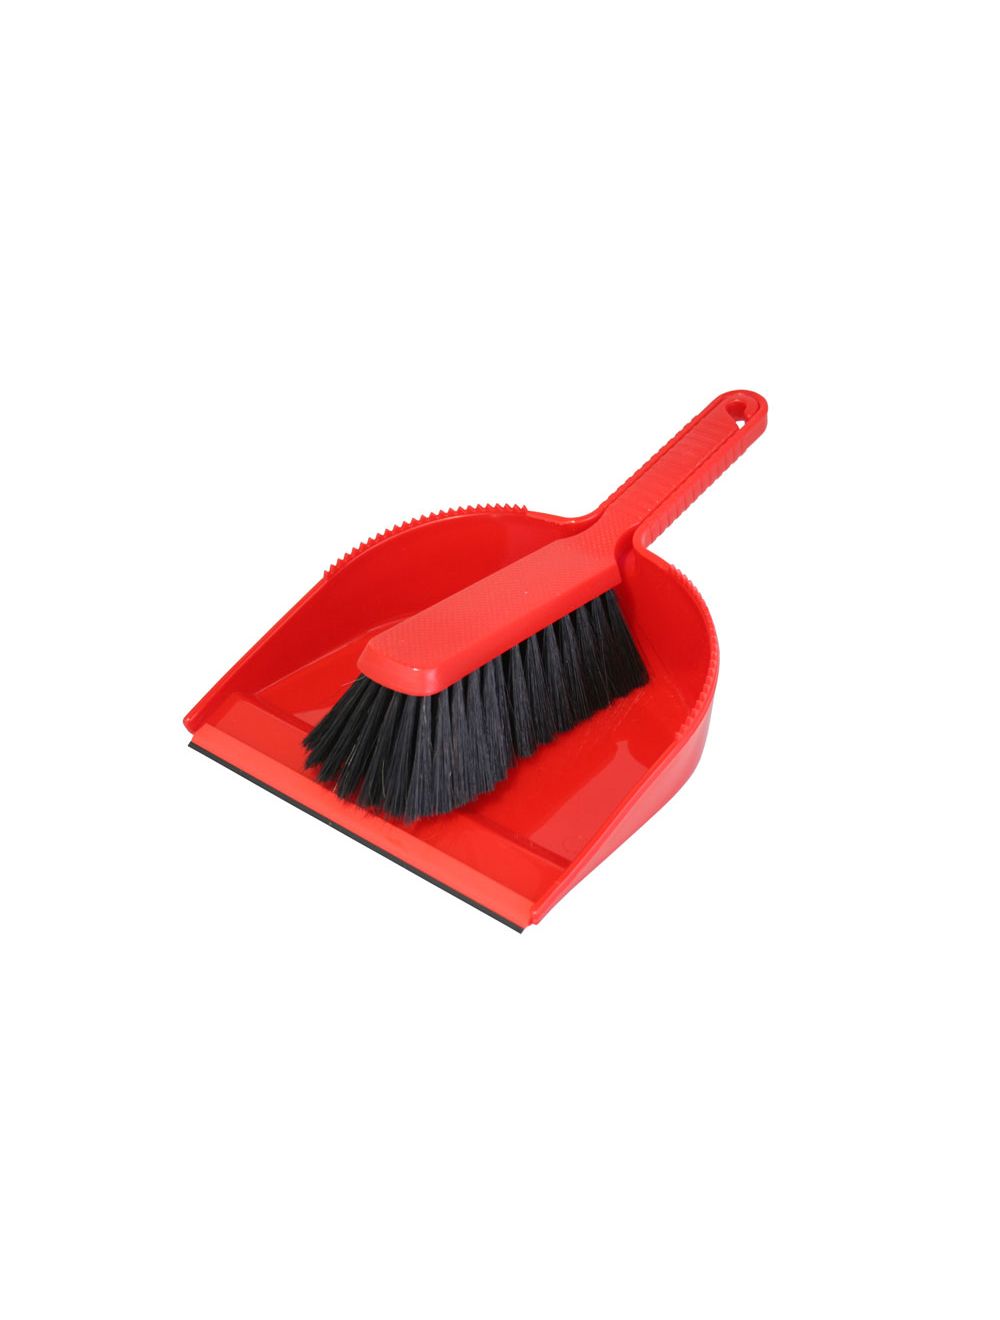 Recycling Dustpan Set - Assorted